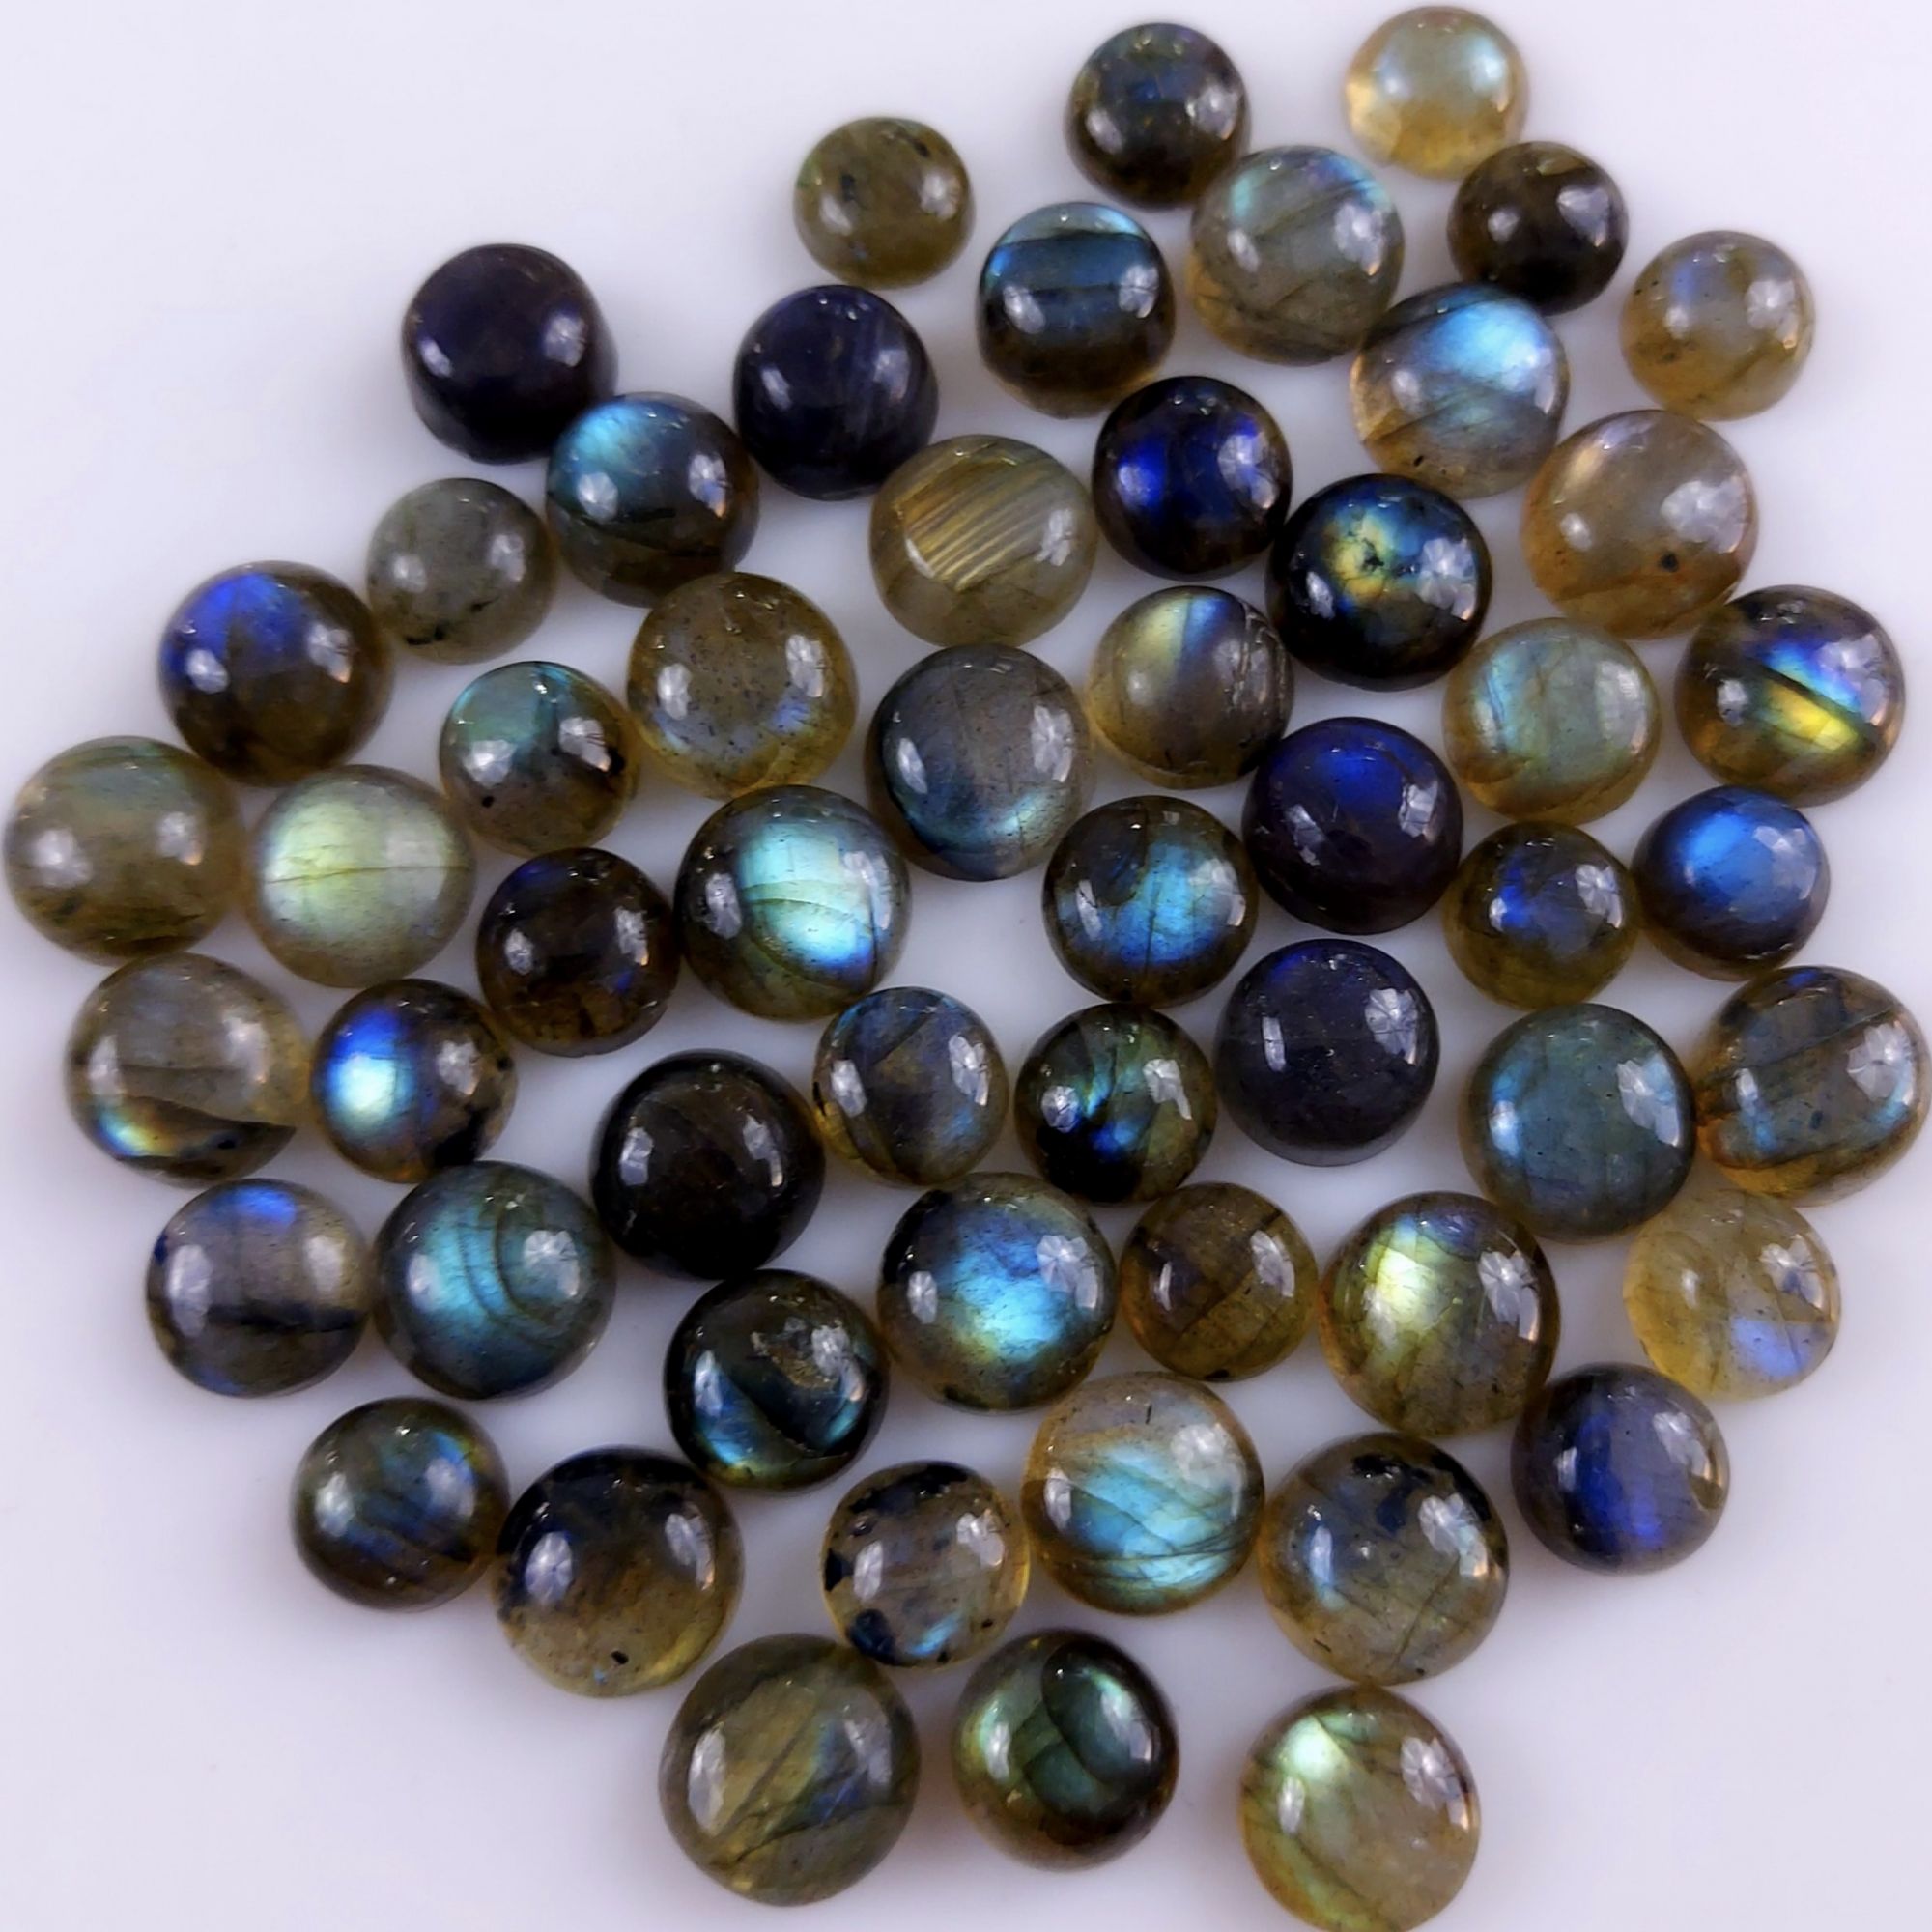 55 Pcs176Cts Natural Multifire Labradorite Loose Cabochon Round Gemstone Lot for Jewelry Making  7x7 5x5mm#1062